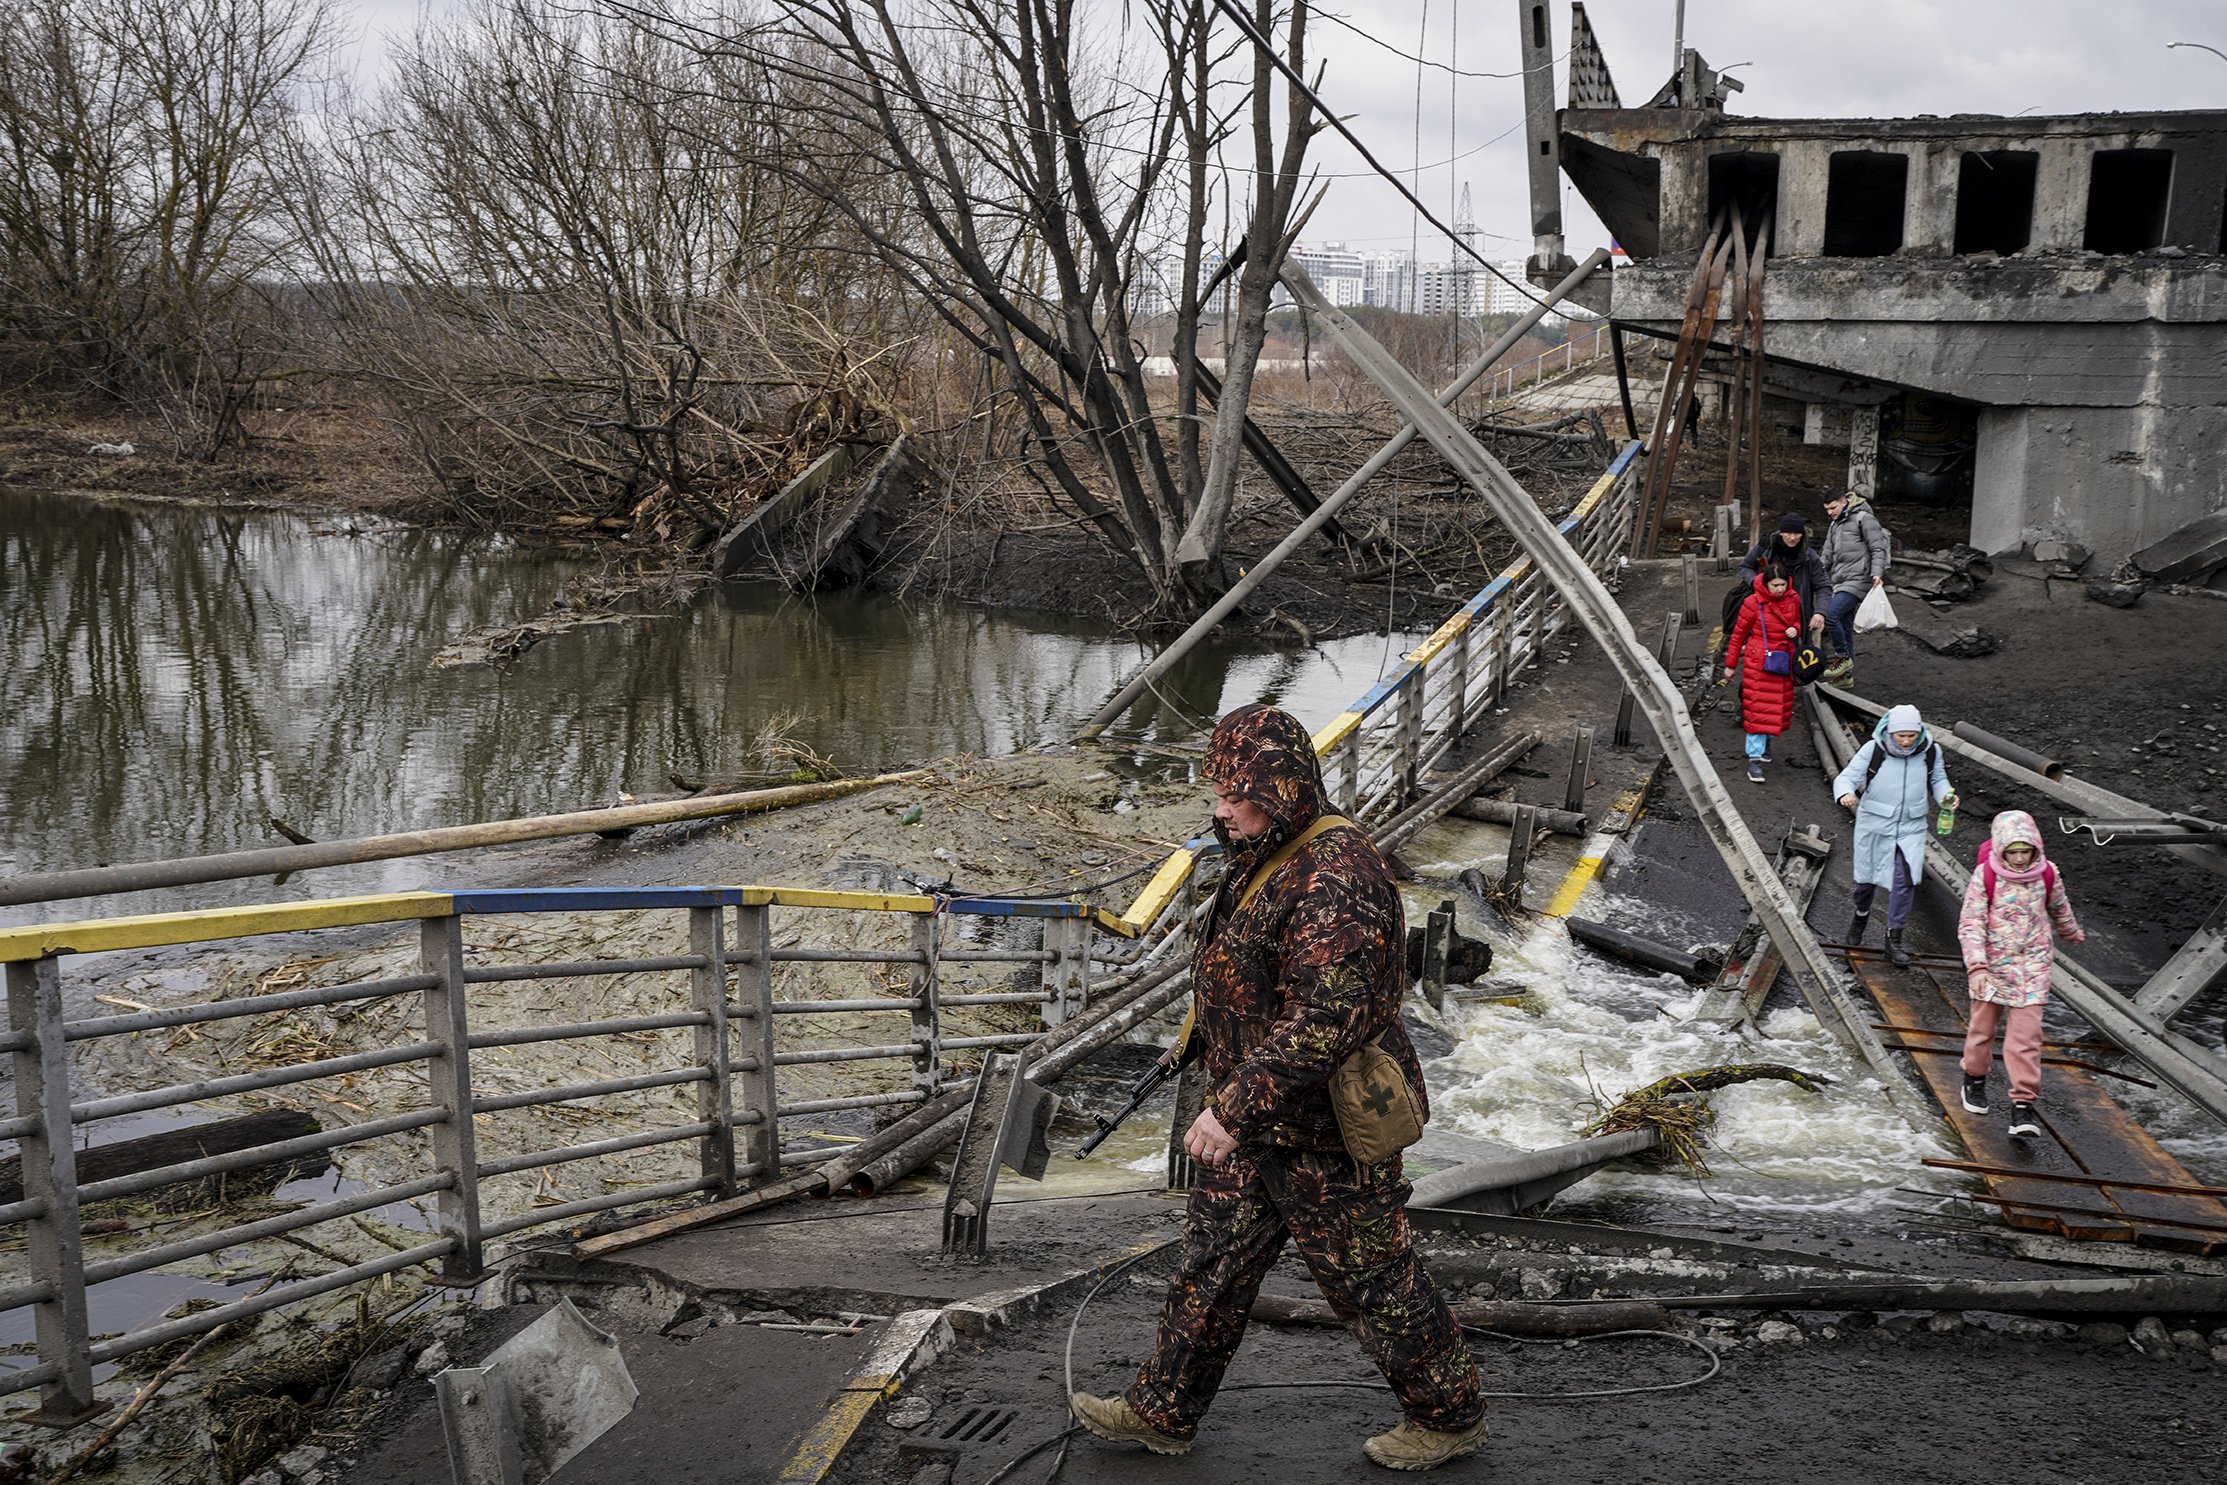 ‘Bridge of life’ saves lives in Ukraine amid Russian invasion | Daily Sabah